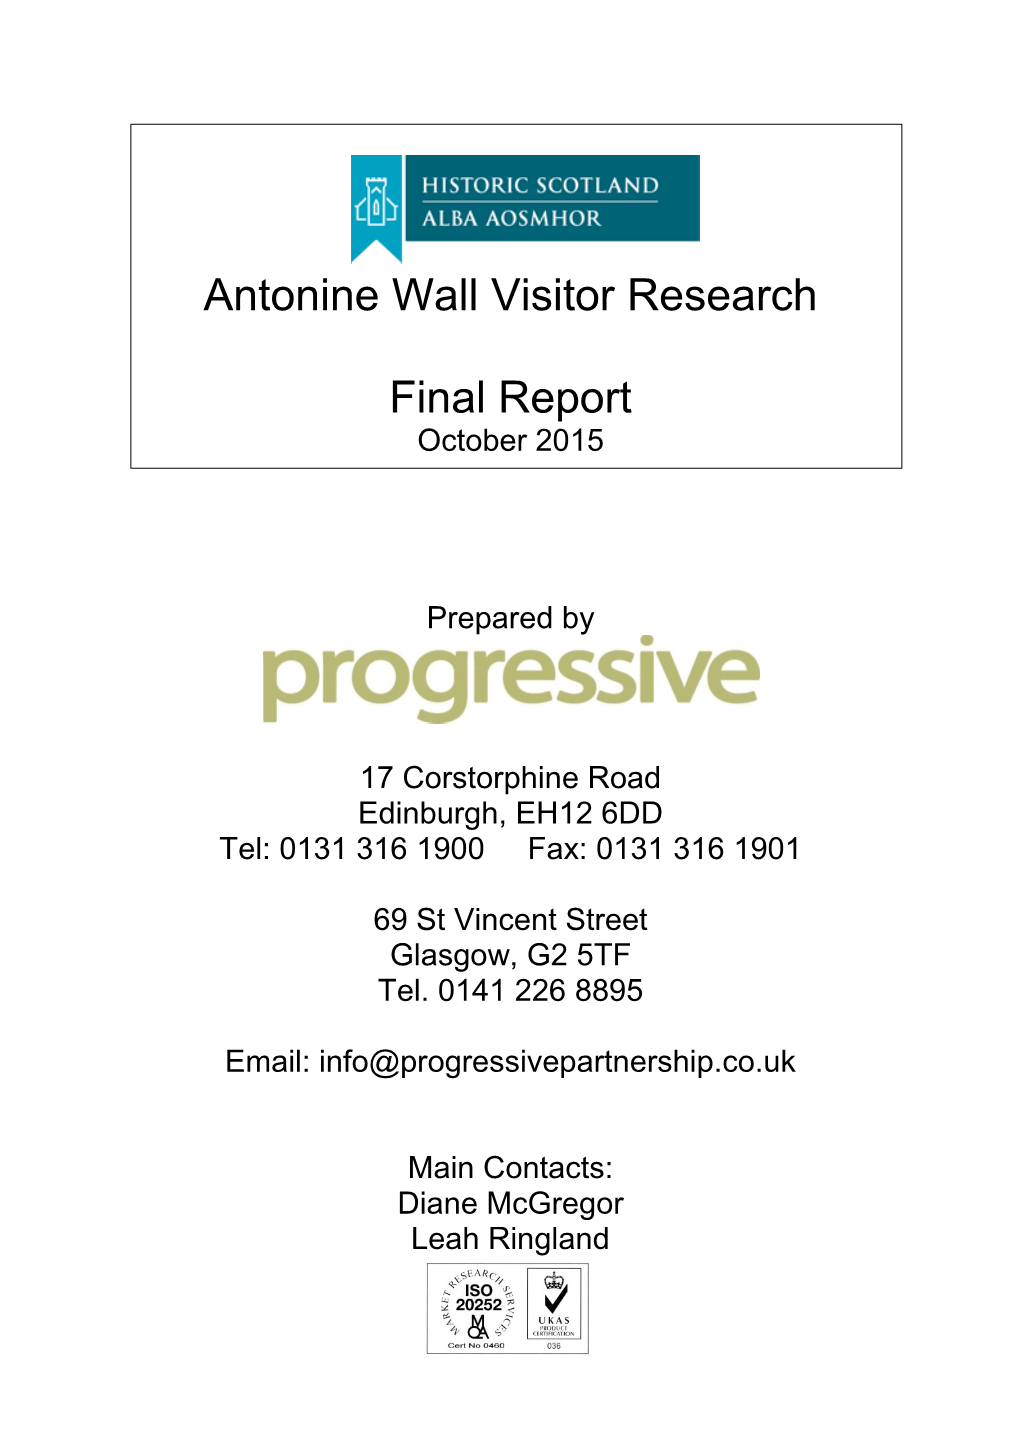 Antonine Wall Visitor Research Final Report